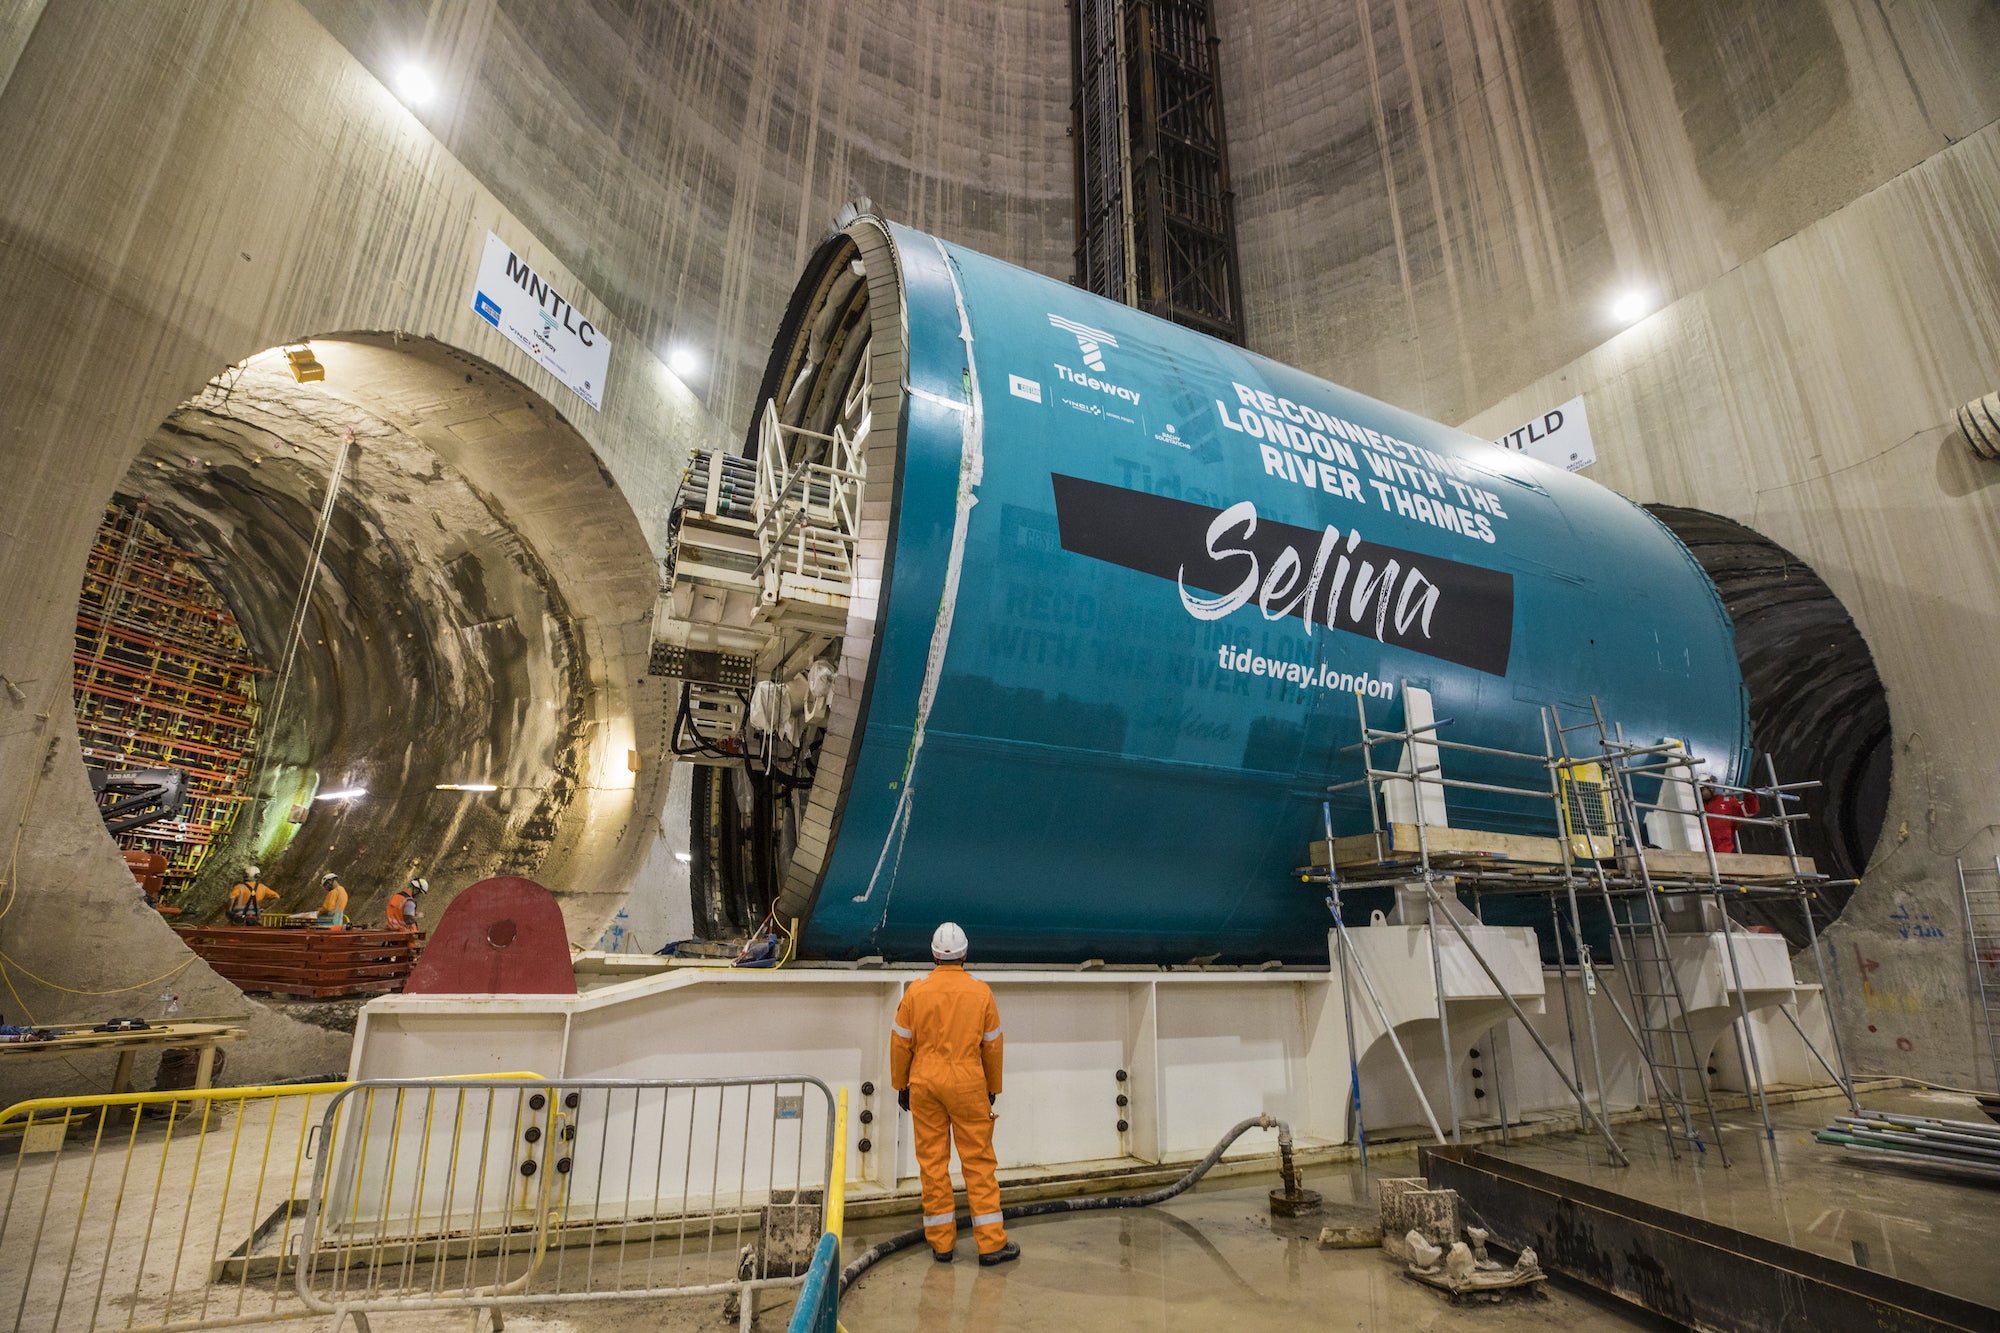 To build the new sewer, Tideway used six giant tunnel boring machines. The biggest of them are about 26 feet wide.